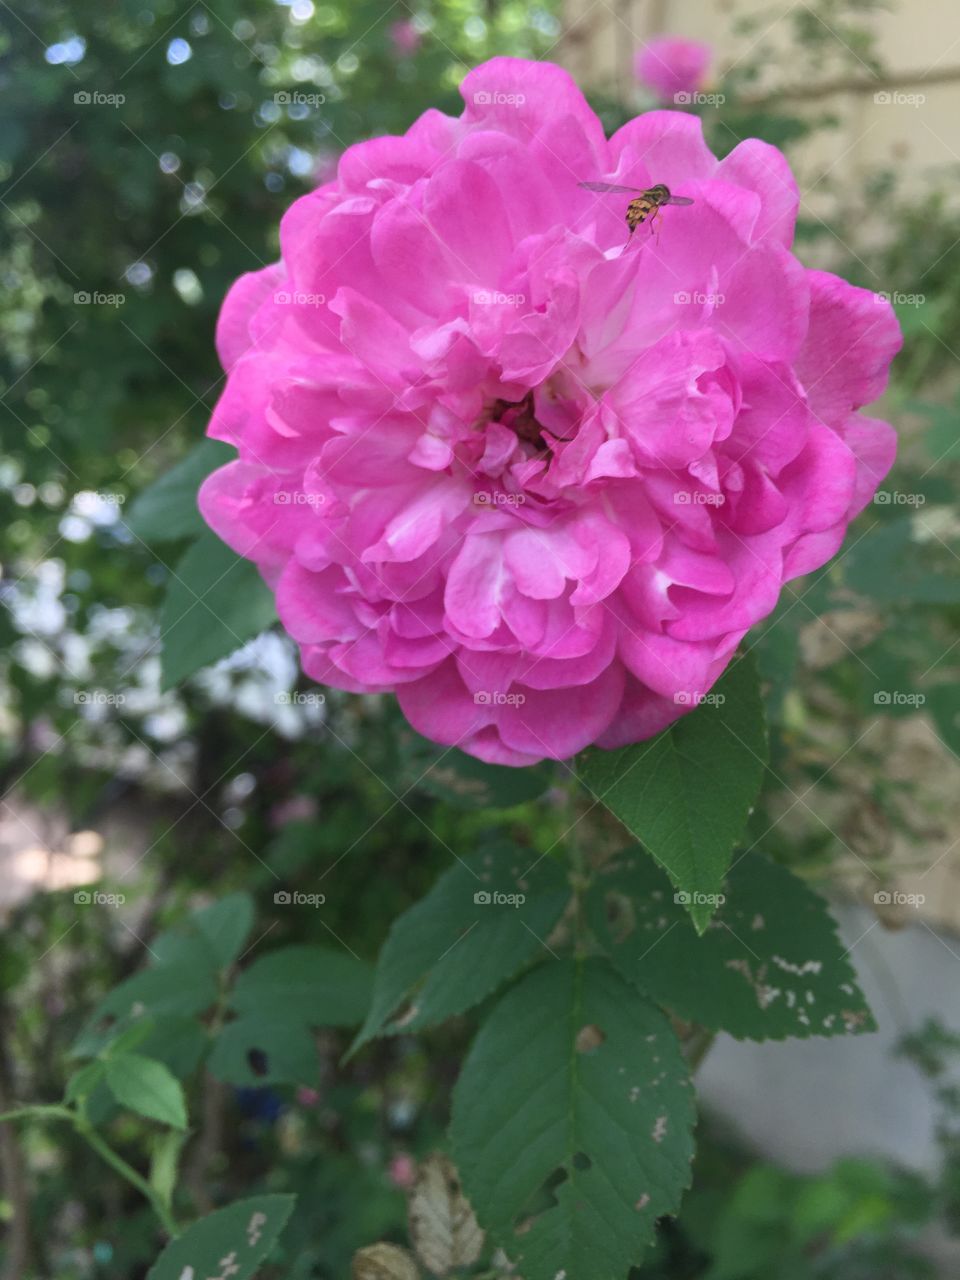 Busy bees flying around a beautiful pink rose.